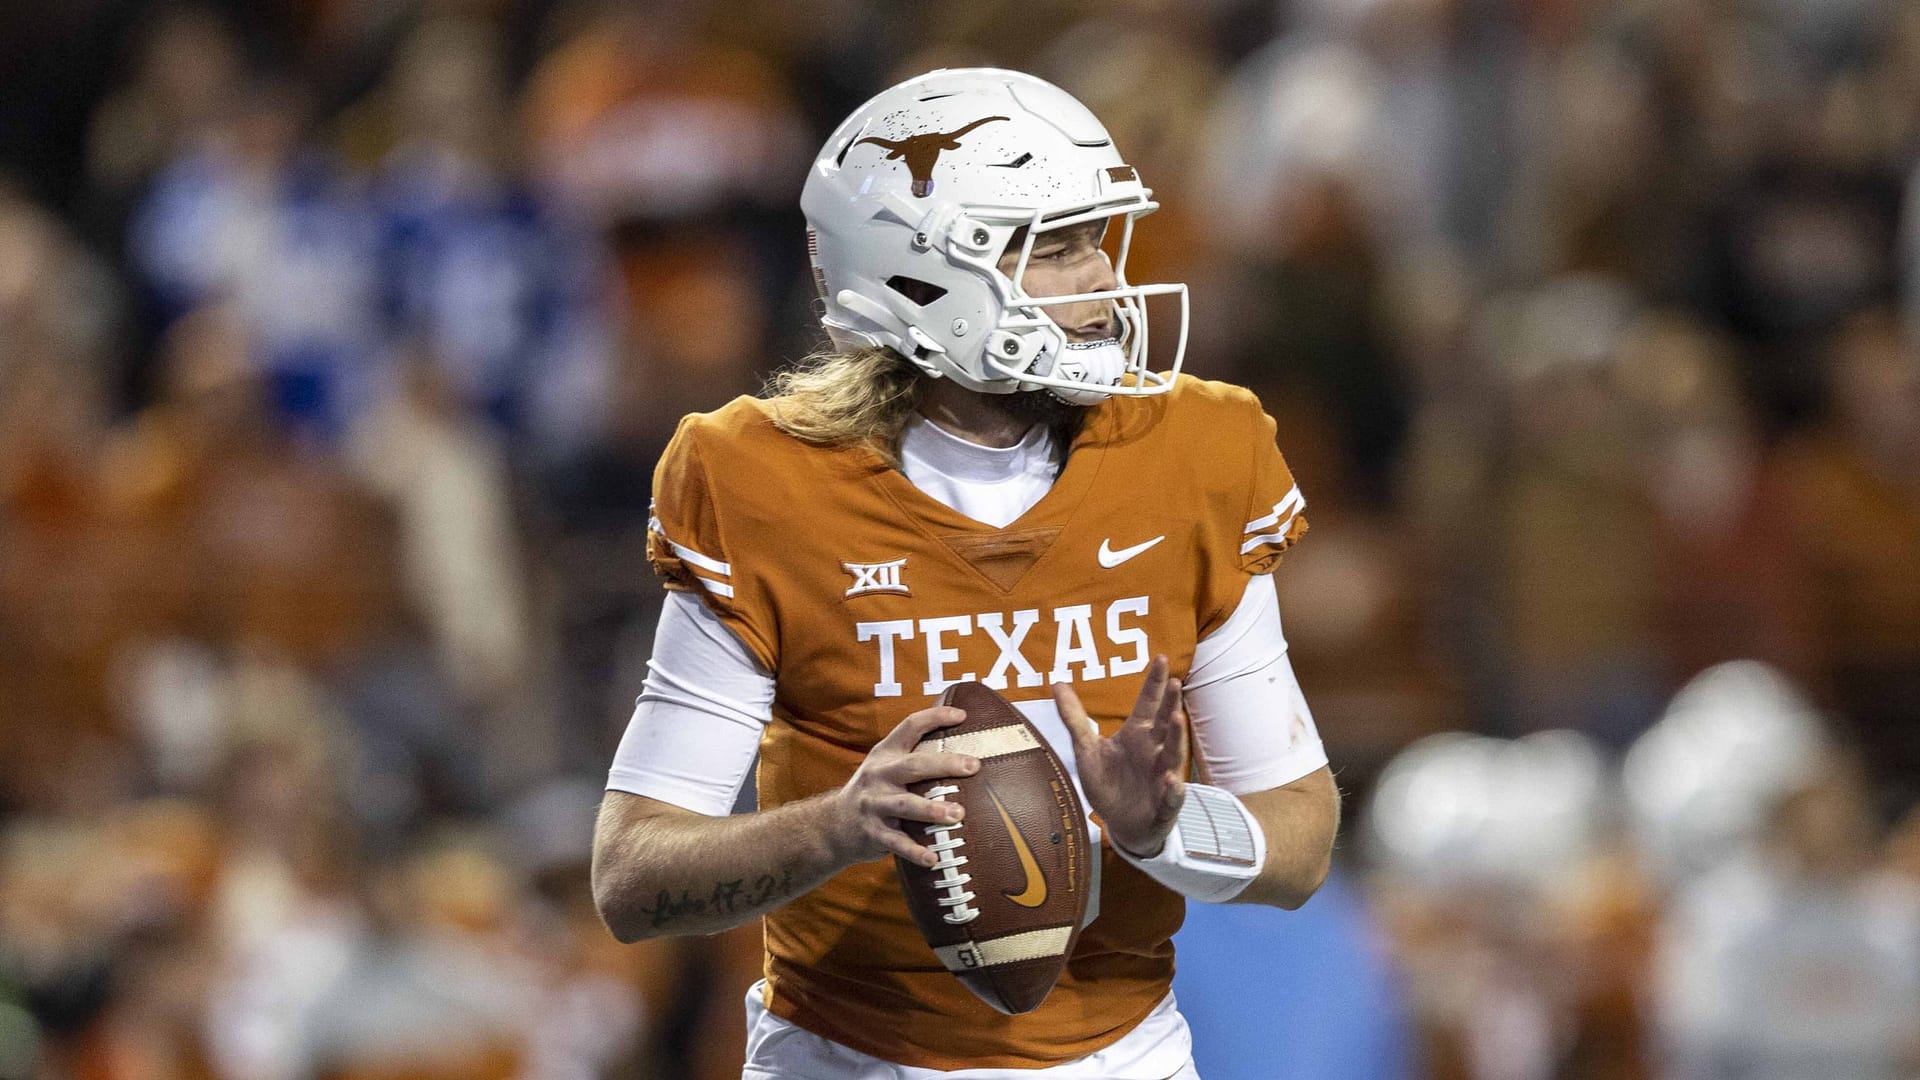 The latest Quinn Ewers injury update could cause concern for the Texas Longhorns' hopes at a BCS bowl game..